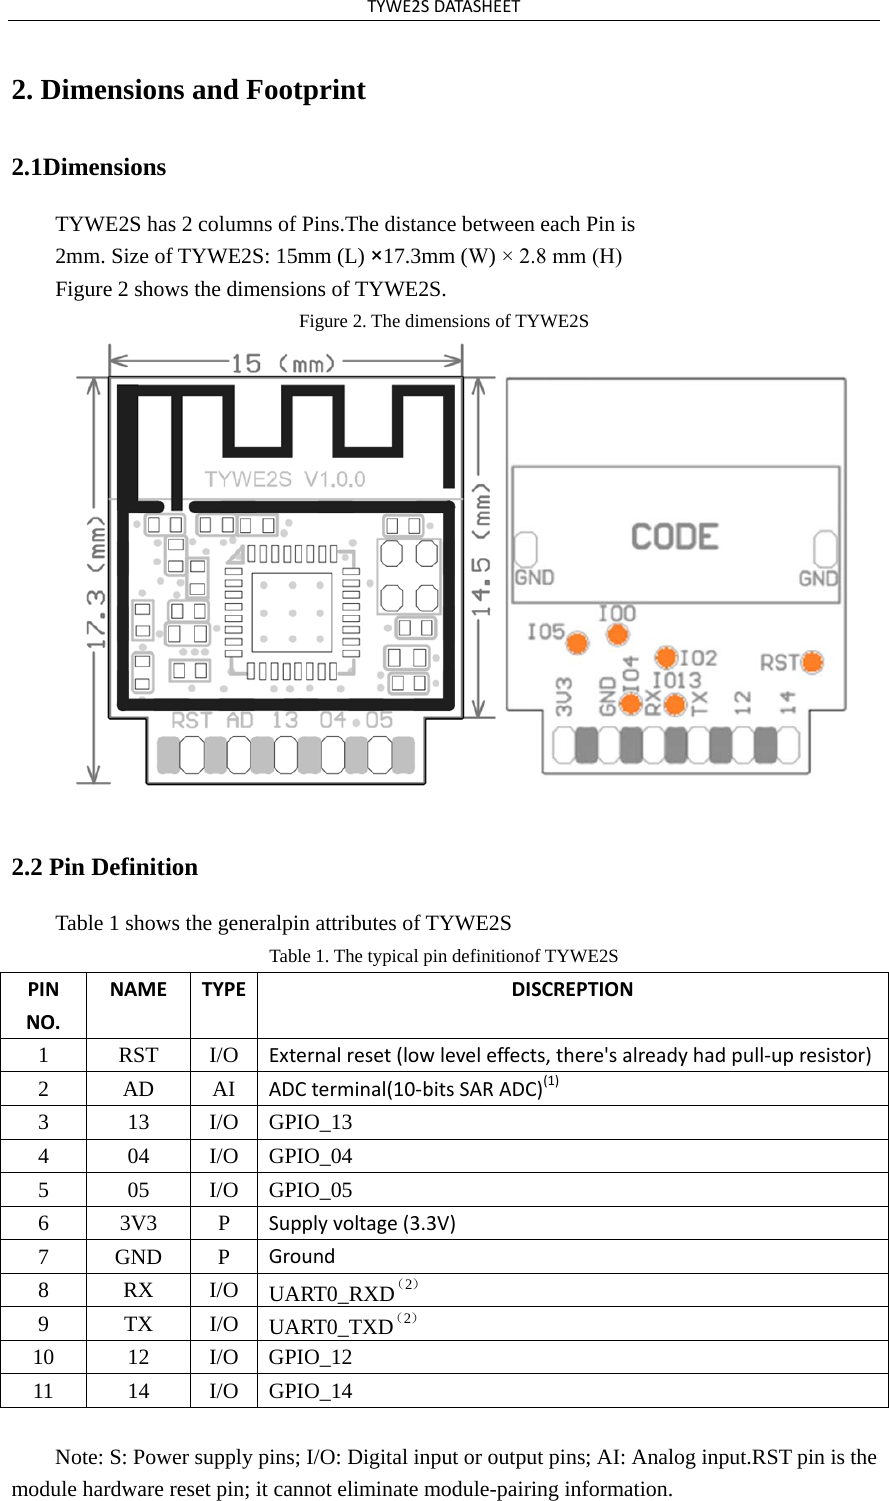 TYWE2SDATASHEET2. Dimensions and Footprint2.1Dimensions TYWE2S has 2 columns of Pins.The distance between each Pin is 2mm. Size of TYWE2S: 15mm (L) ×17.3mm (W) × 2.8 mm (H)Figure 2 shows the dimensions of TYWE2S. Figure 2. The dimensions of TYWE2S 2.2 Pin Definition Table 1 shows the generalpin attributes of TYWE2S Table 1. The typical pin definitionof TYWE2S PINNO.NAMETYPEDISCREPTION1 RST I/O Externalreset(lowleveleffects,there&apos;salreadyhadpull‐upresistor)2 AD AI ADCterminal(10‐bitsSARADC)(1) 3 13 I/O GPIO_13 4 04 I/O GPIO_04 5 05 I/O GPIO_05 6 3V3 P Supplyvoltage(3.3V) 7 GND P Ground 8 RX I/O UART0_RXD ）（2 9 TX I/O UART0_TXD ）（2 10 12 I/O GPIO_12 11 14 I/O GPIO_14 Note: S: Power supply pins; I/O: Digital input or output pins; AI: Analog input.RST pin is the module hardware reset pin; it cannot eliminate module-pairing information. 